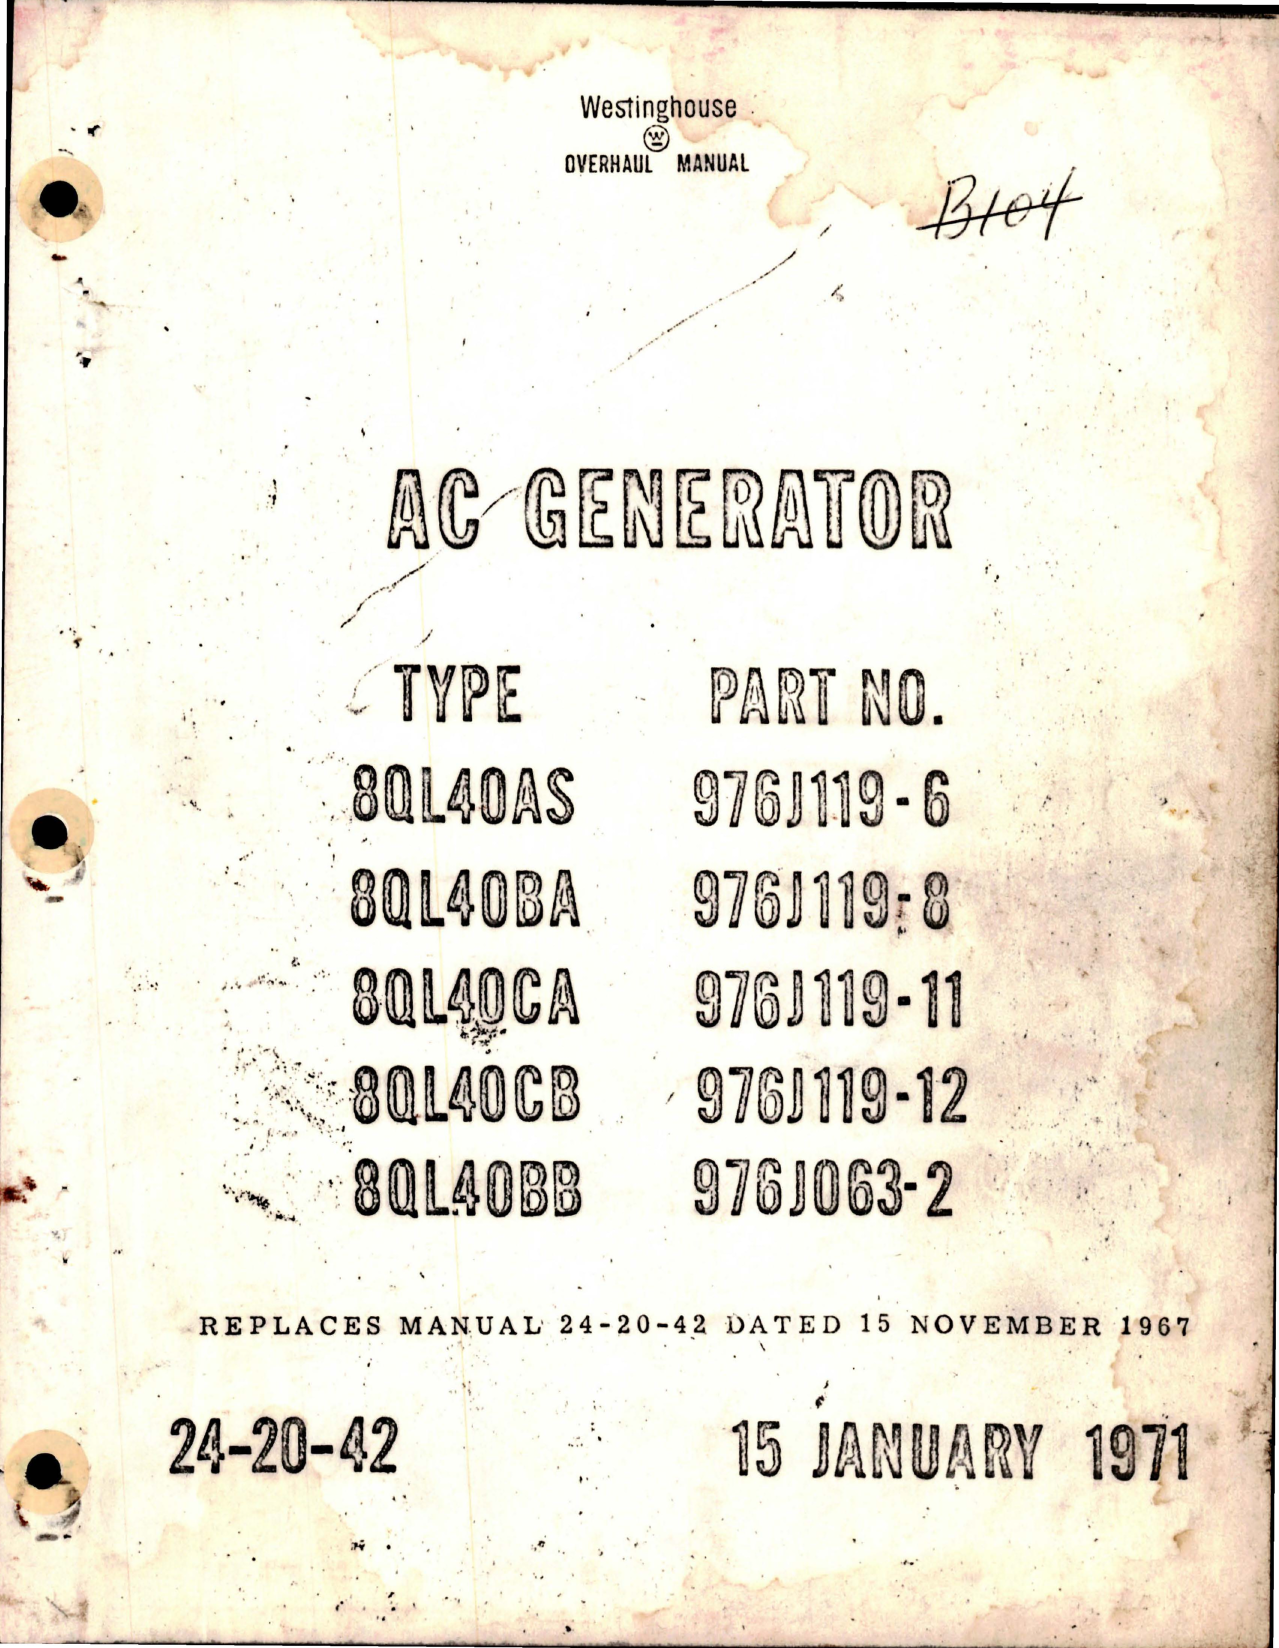 Sample page 1 from AirCorps Library document: Overhaul Manual for AC Generator - Part 976J119 Series